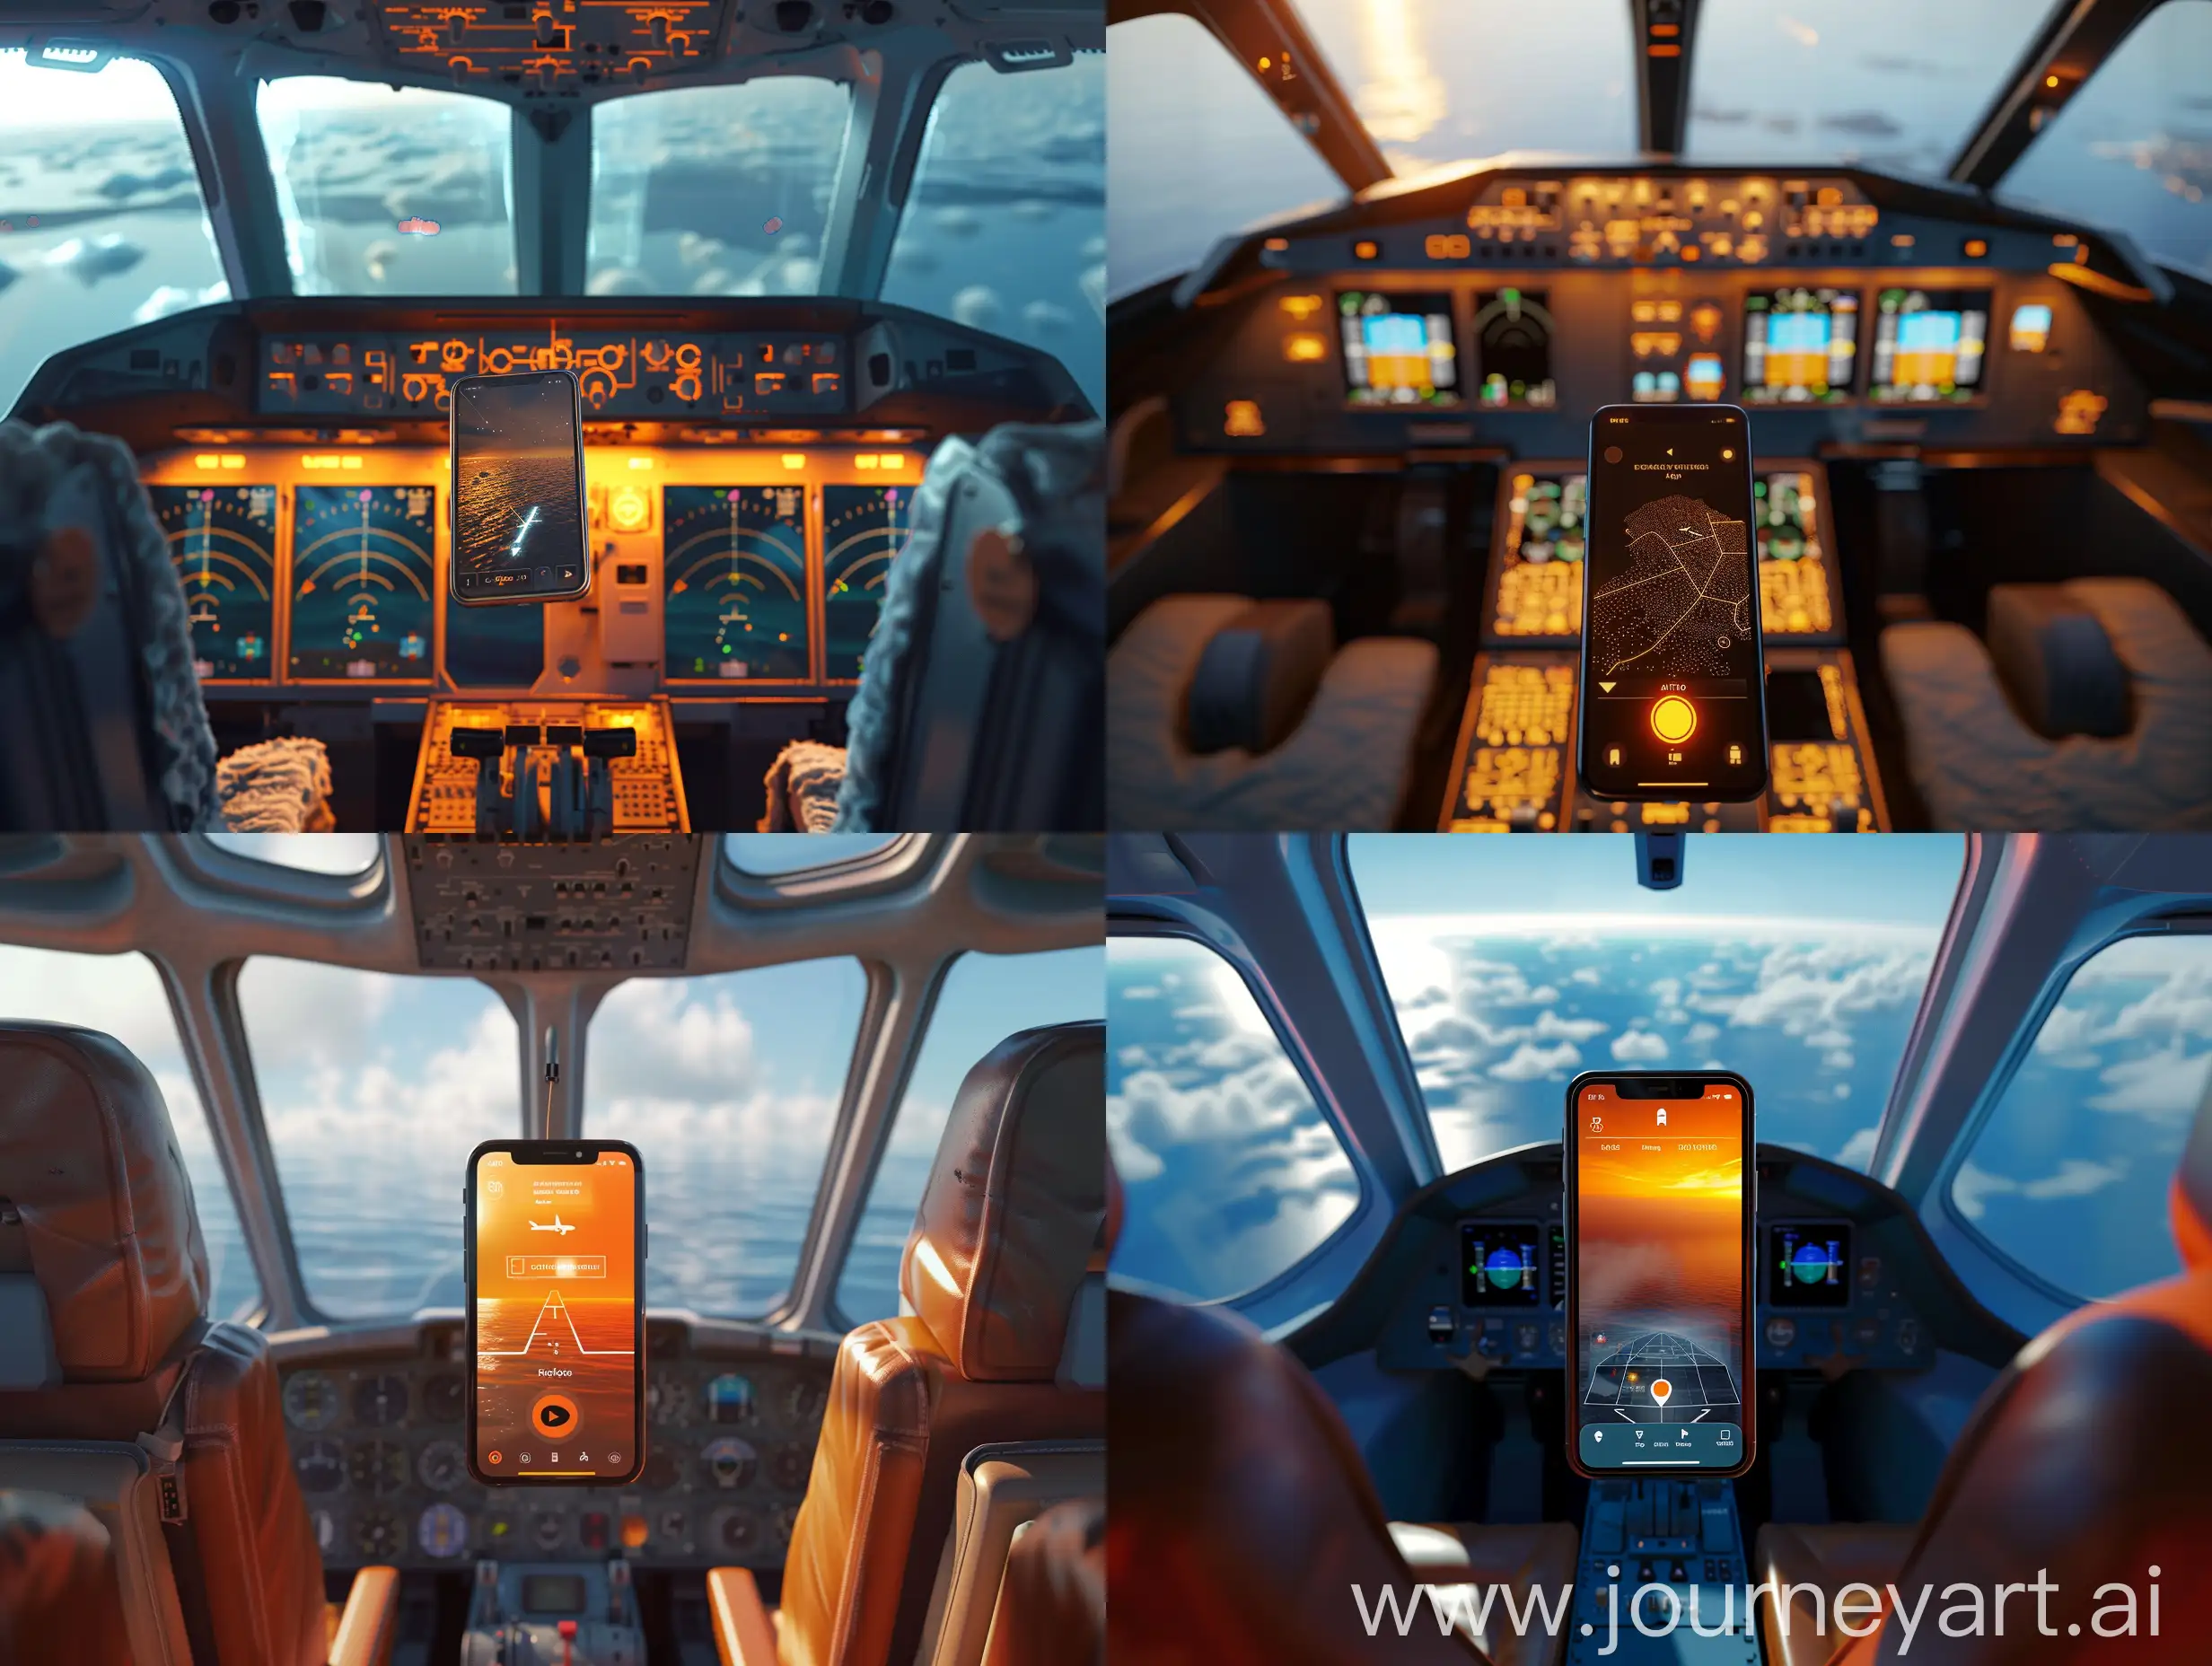 Onboard a realistically depicted airplane. It's a hot summer day. At the center of the scene is an overheated phone with a navigation app running. The airplane is heading towards water. Realistic